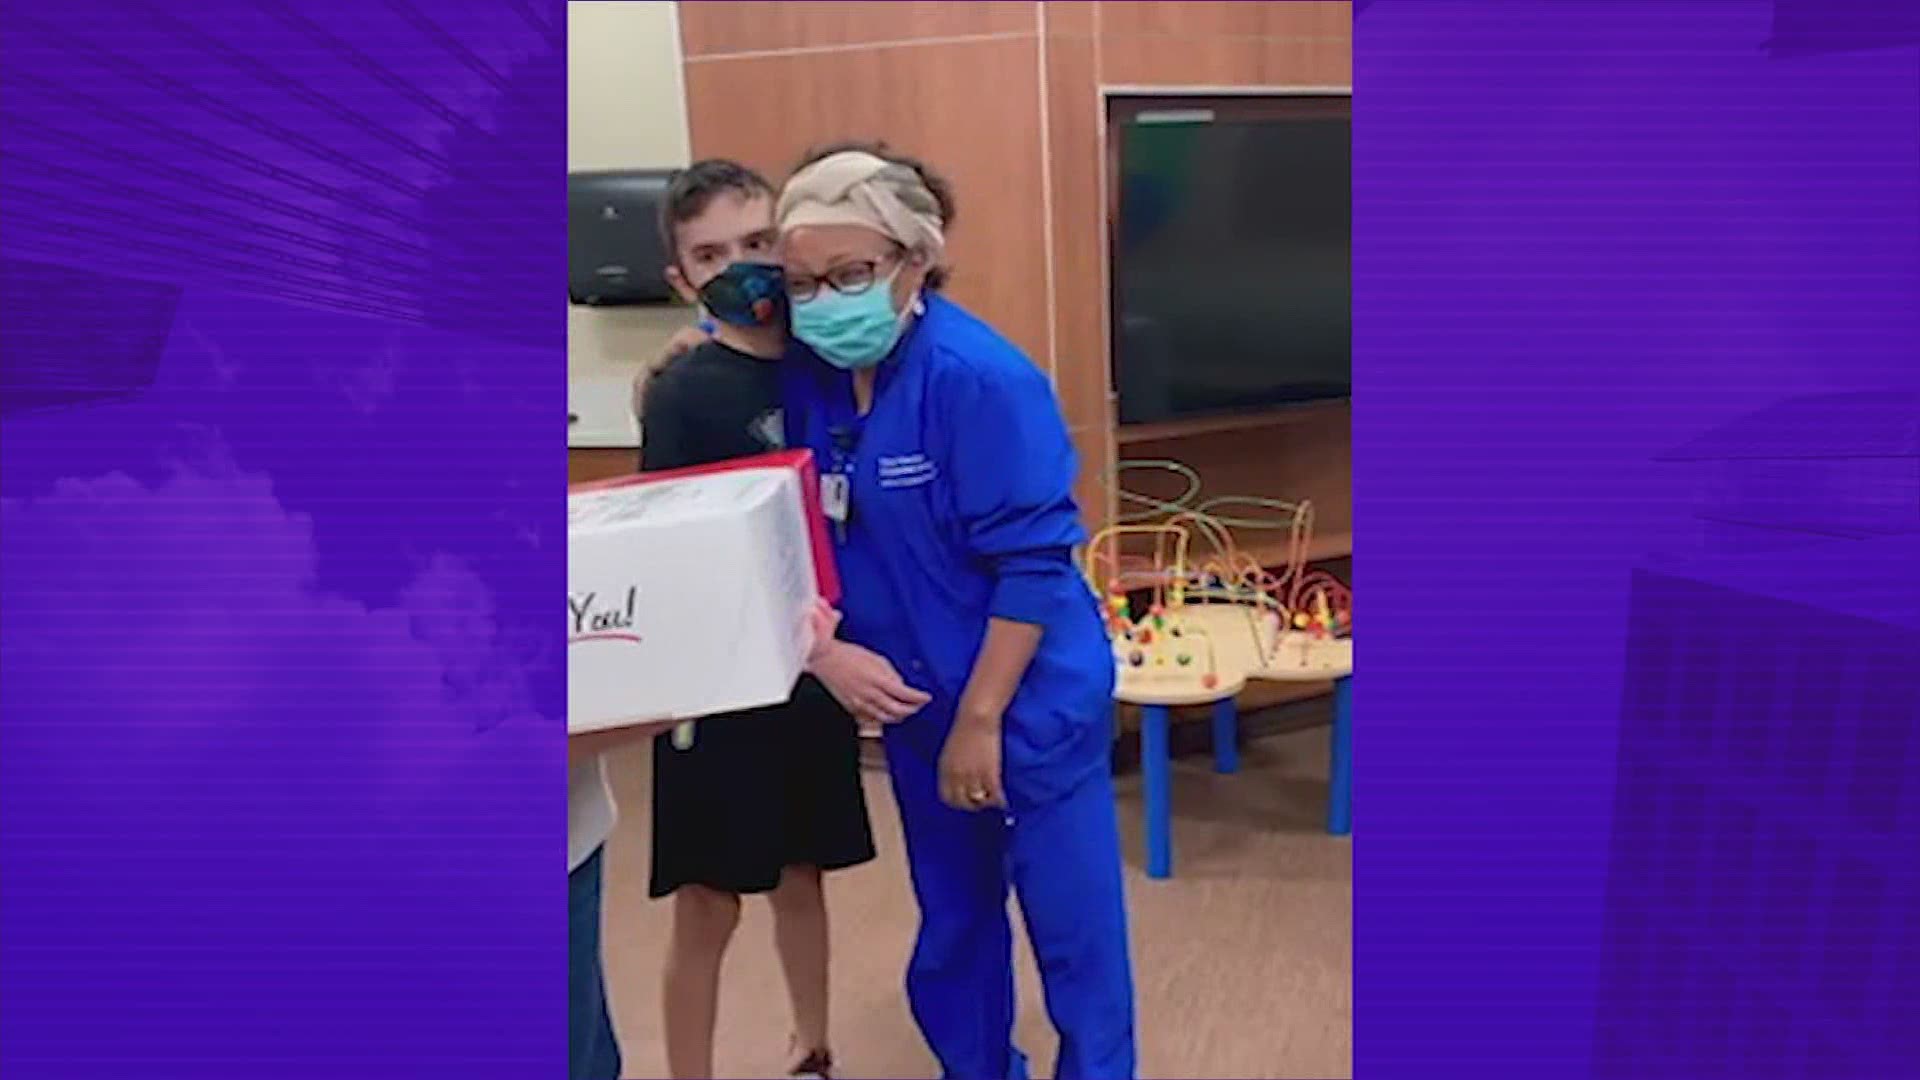 A 13-year-old boy who spent 3 months in the NICU after he was born was reunited with the nurse who cared for him at The Woman’s Hospital of Texas.